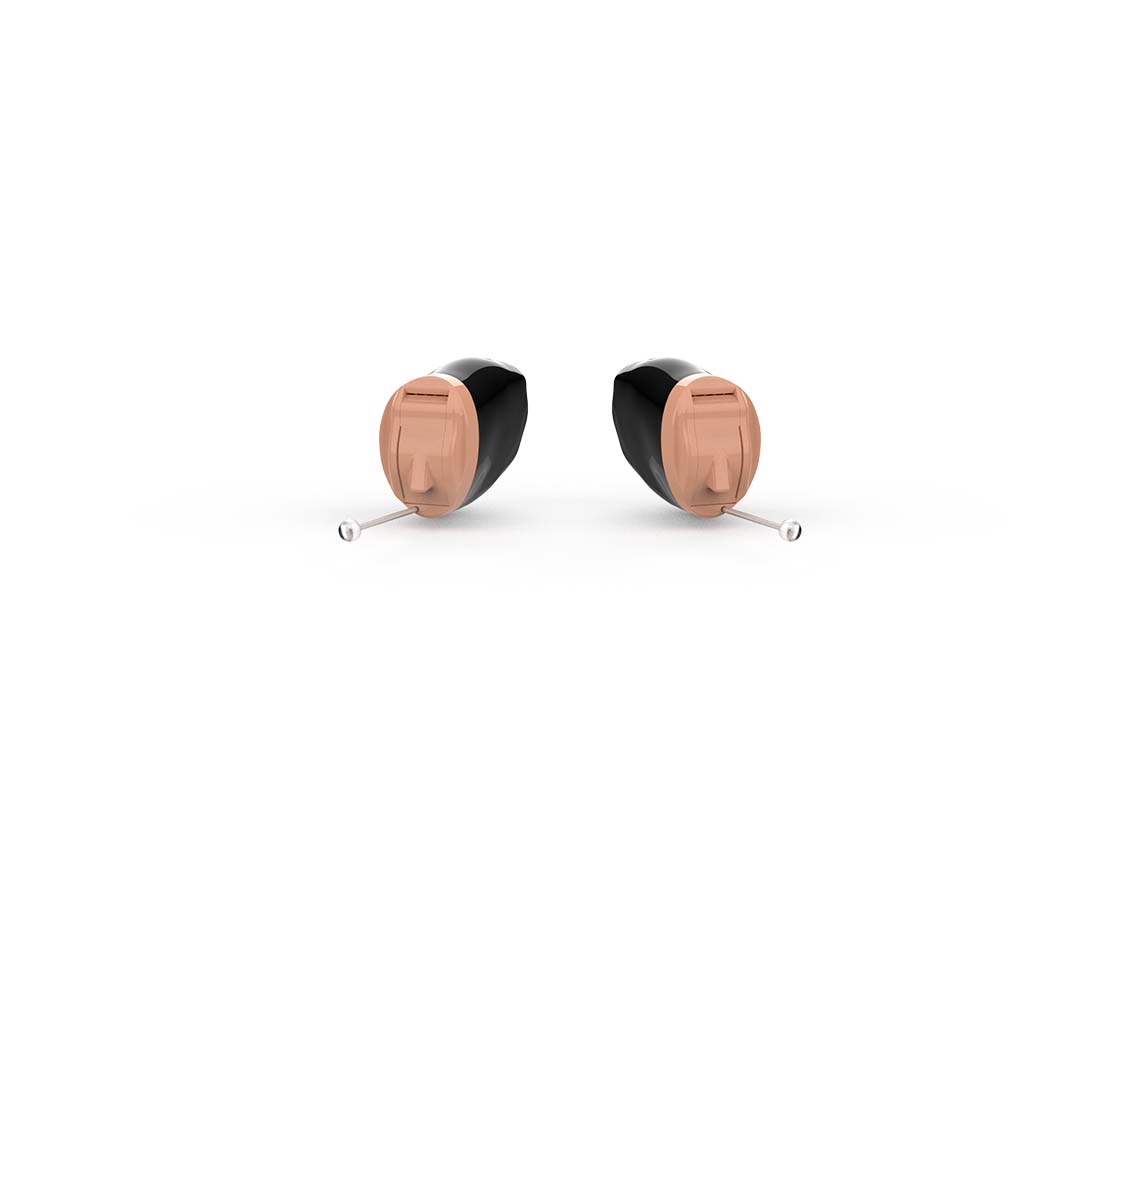 A pair of IIC hearing aids